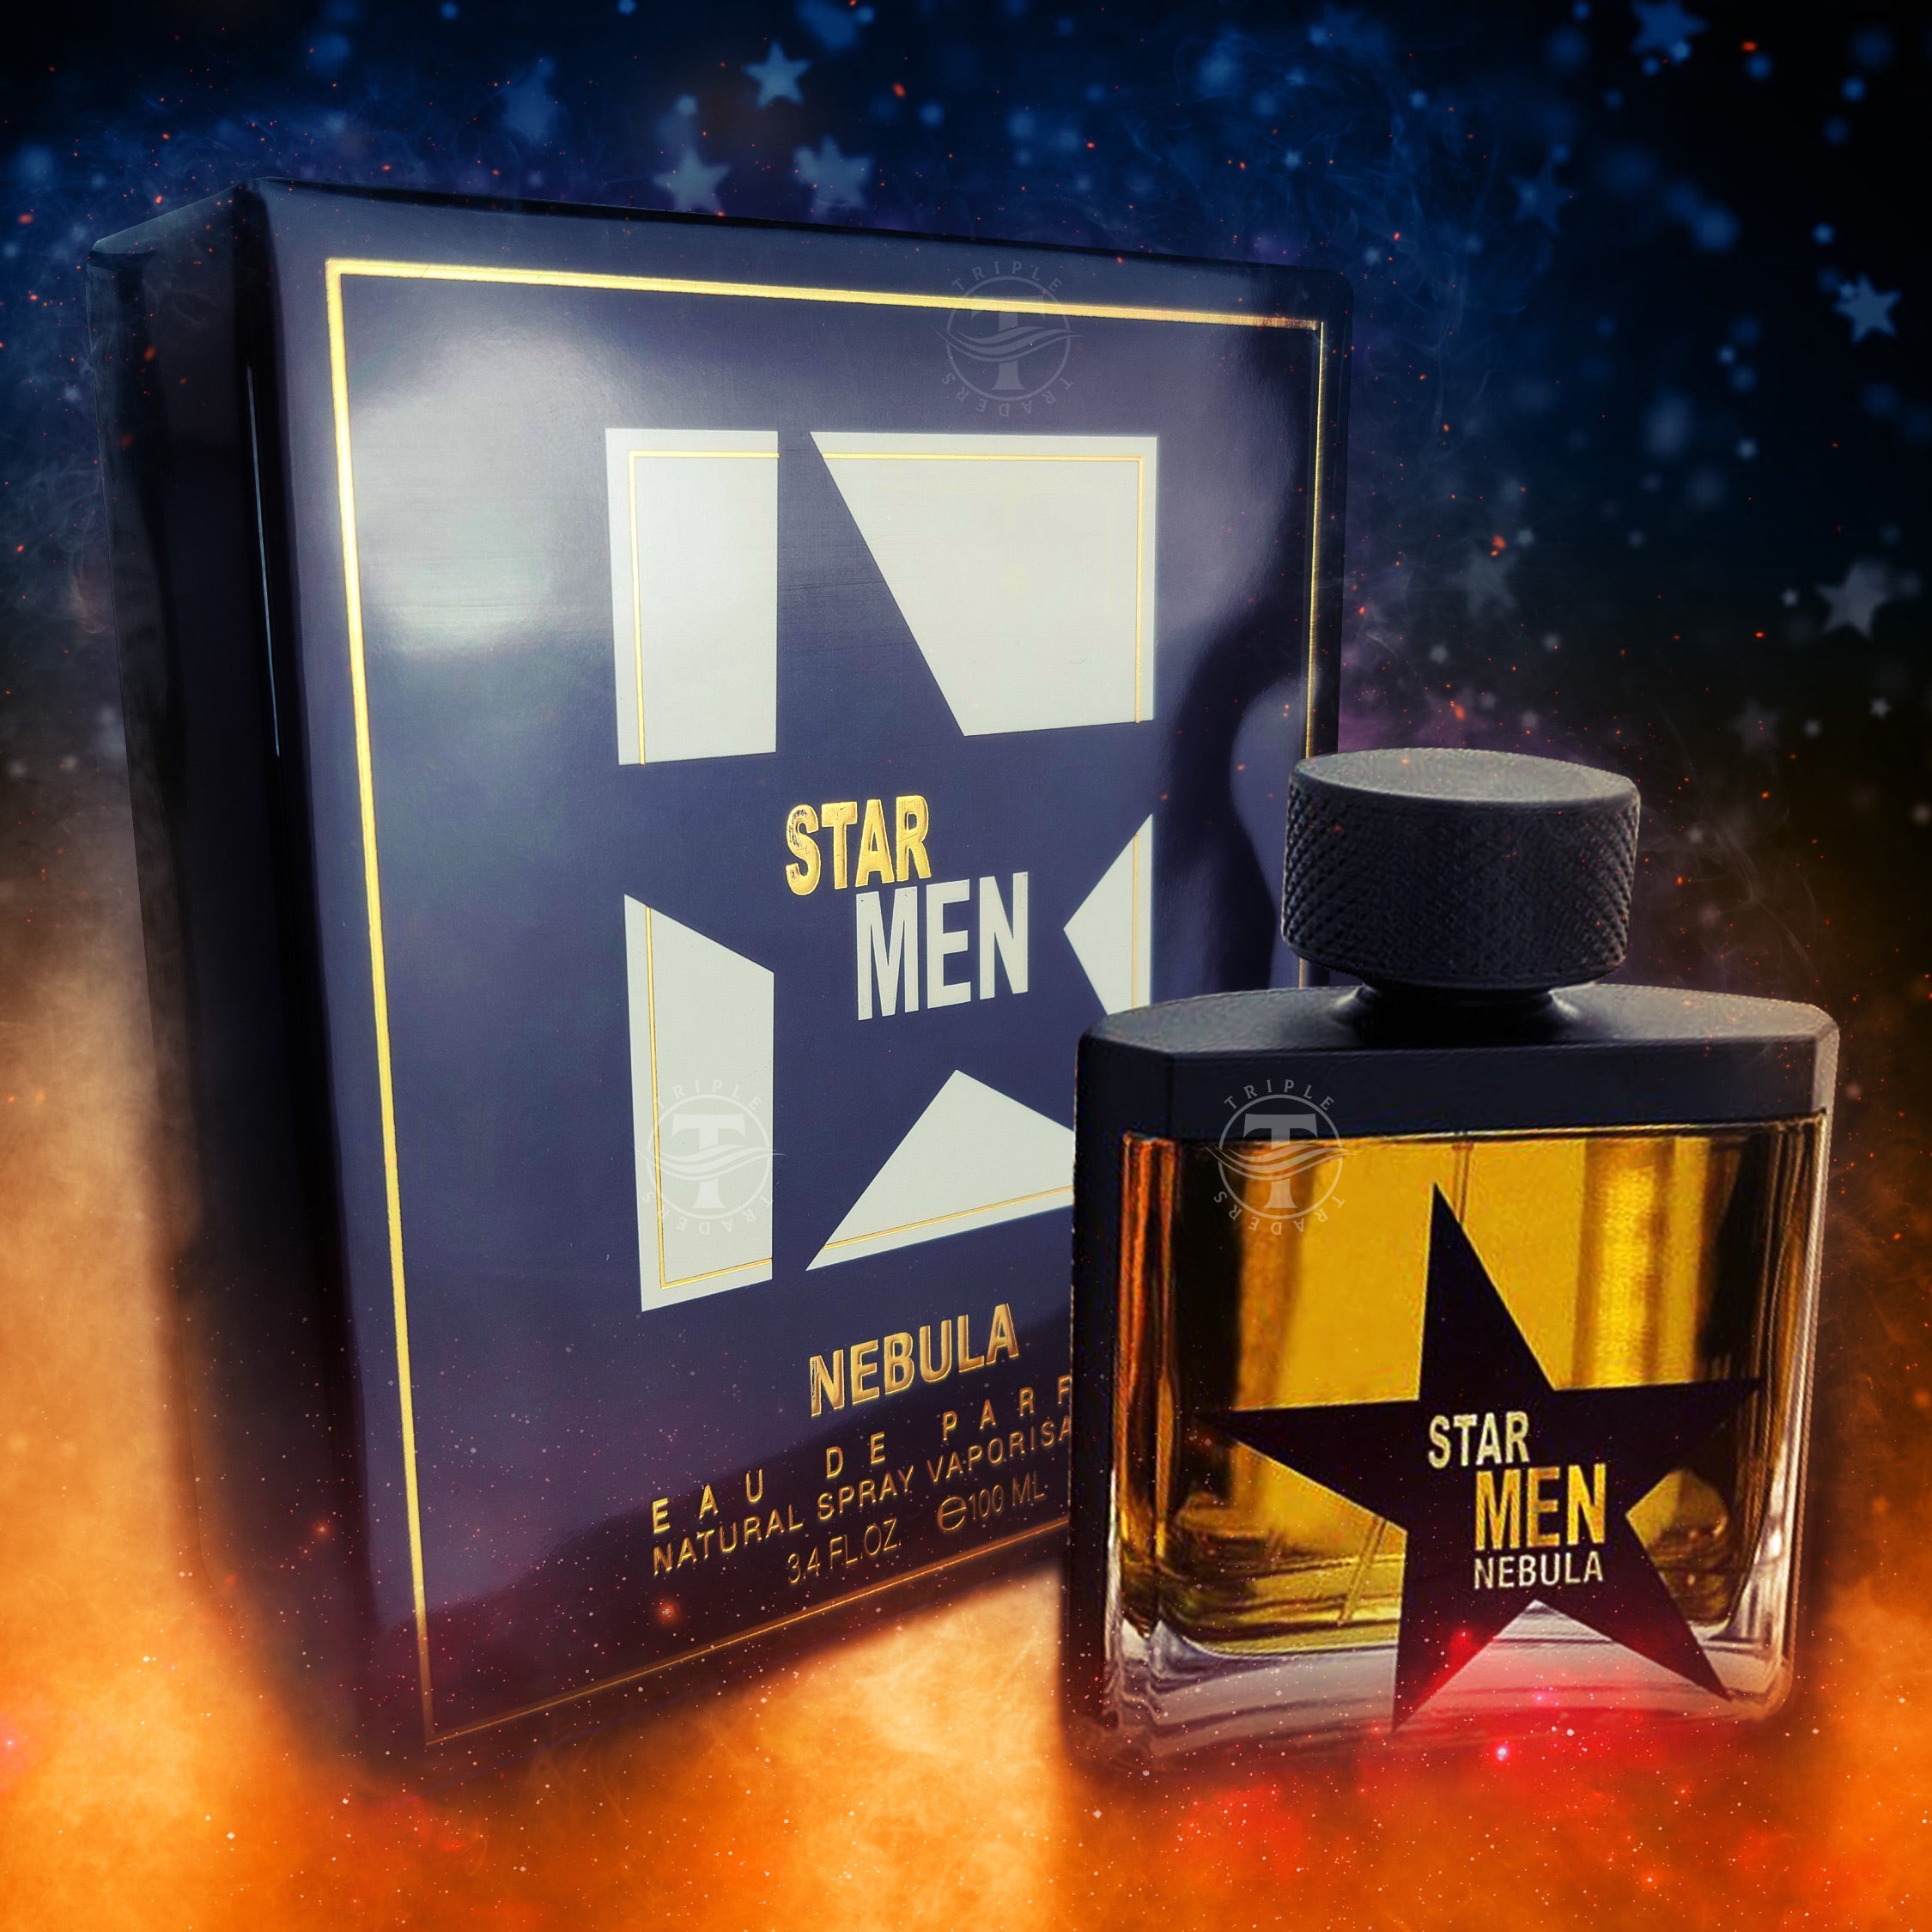  Fragrance World - Star Men Nebula Edp 100ml Perfumes for Men   Amber Woody Fragrance for Men Exclusive I Luxury Niche Perfume Made in UAE  : Beauty & Personal Care